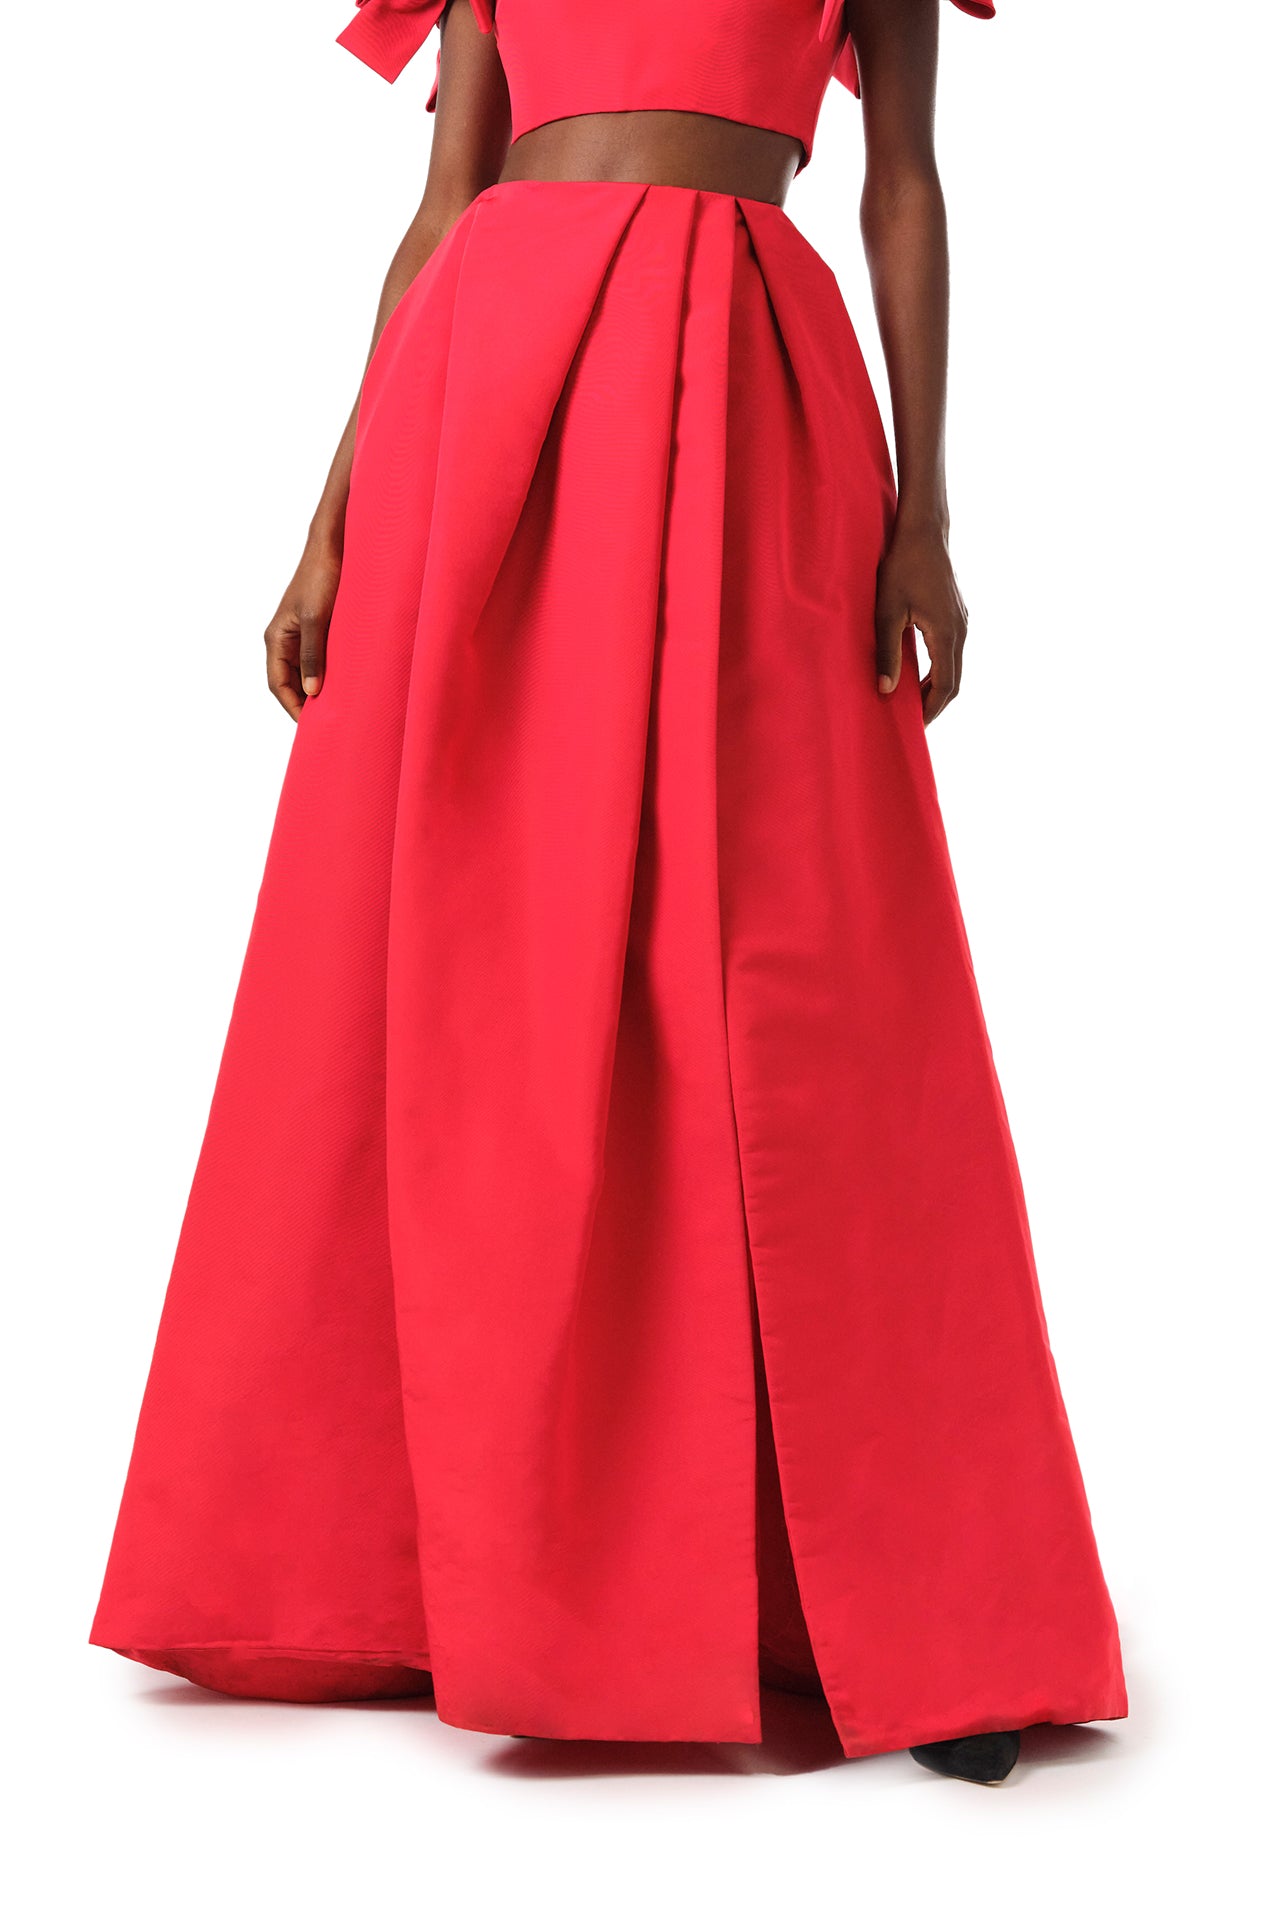 Monique Lhuillier Fall 2024 scarlet red faille pleated ballgown skirt with high front slit and pockets - front crop.